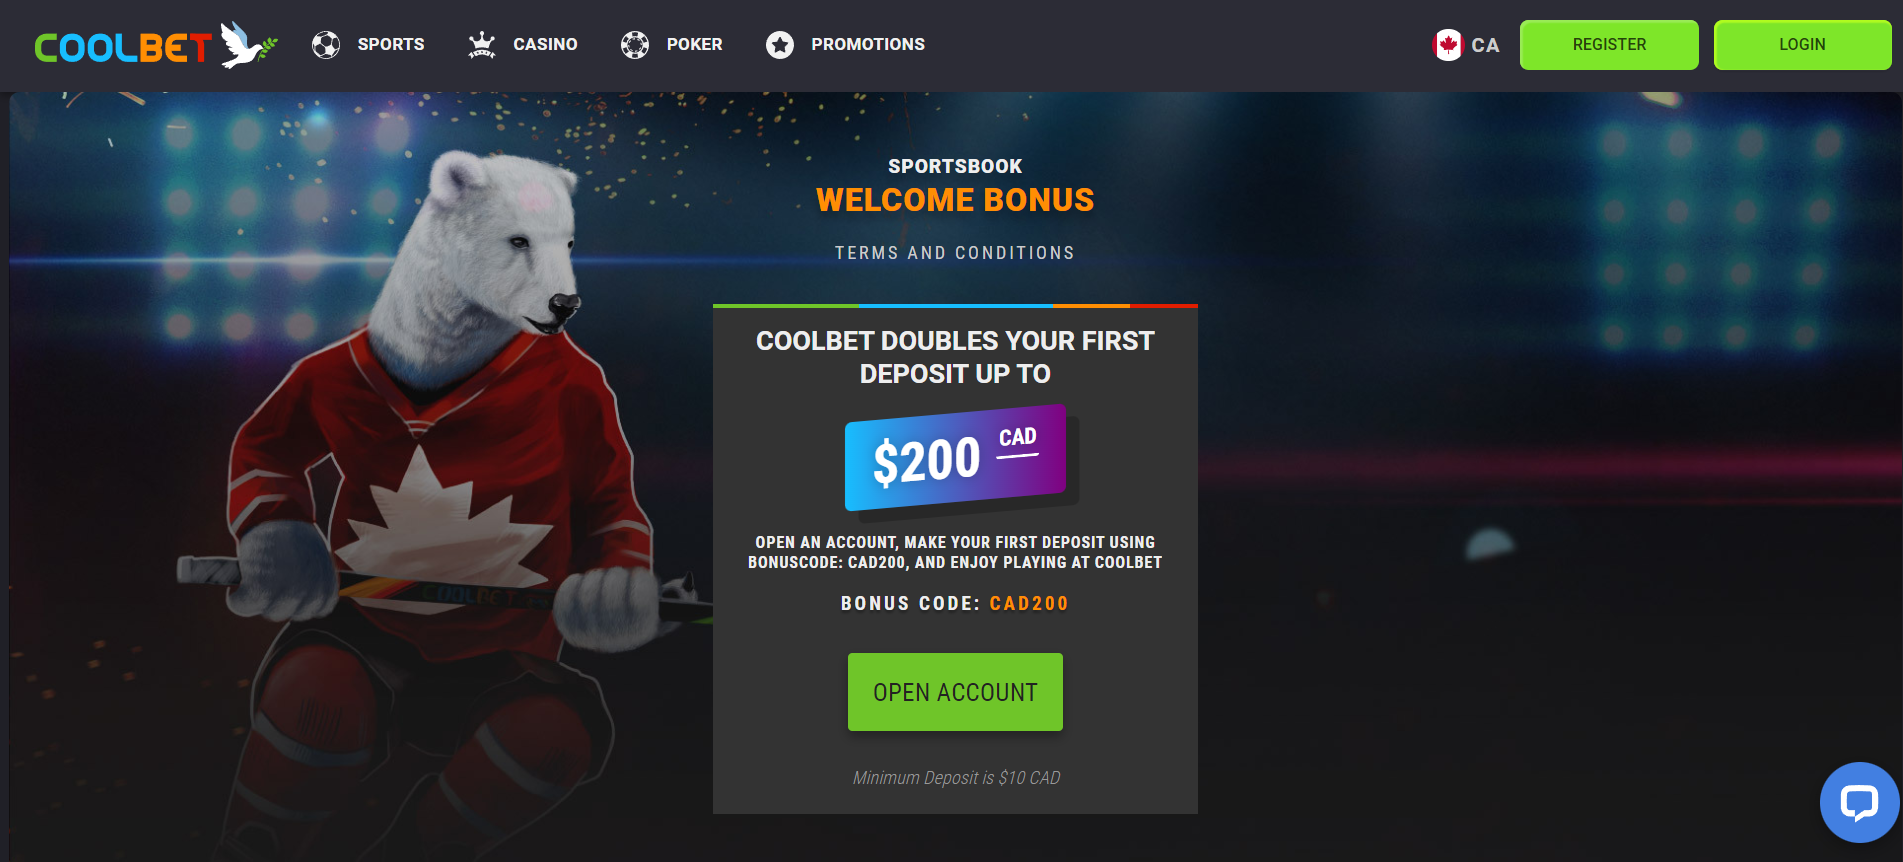 Coolbet has offered a compelling welcome bonus of up to CAD 200 with a minimum deposit of CAD 10.